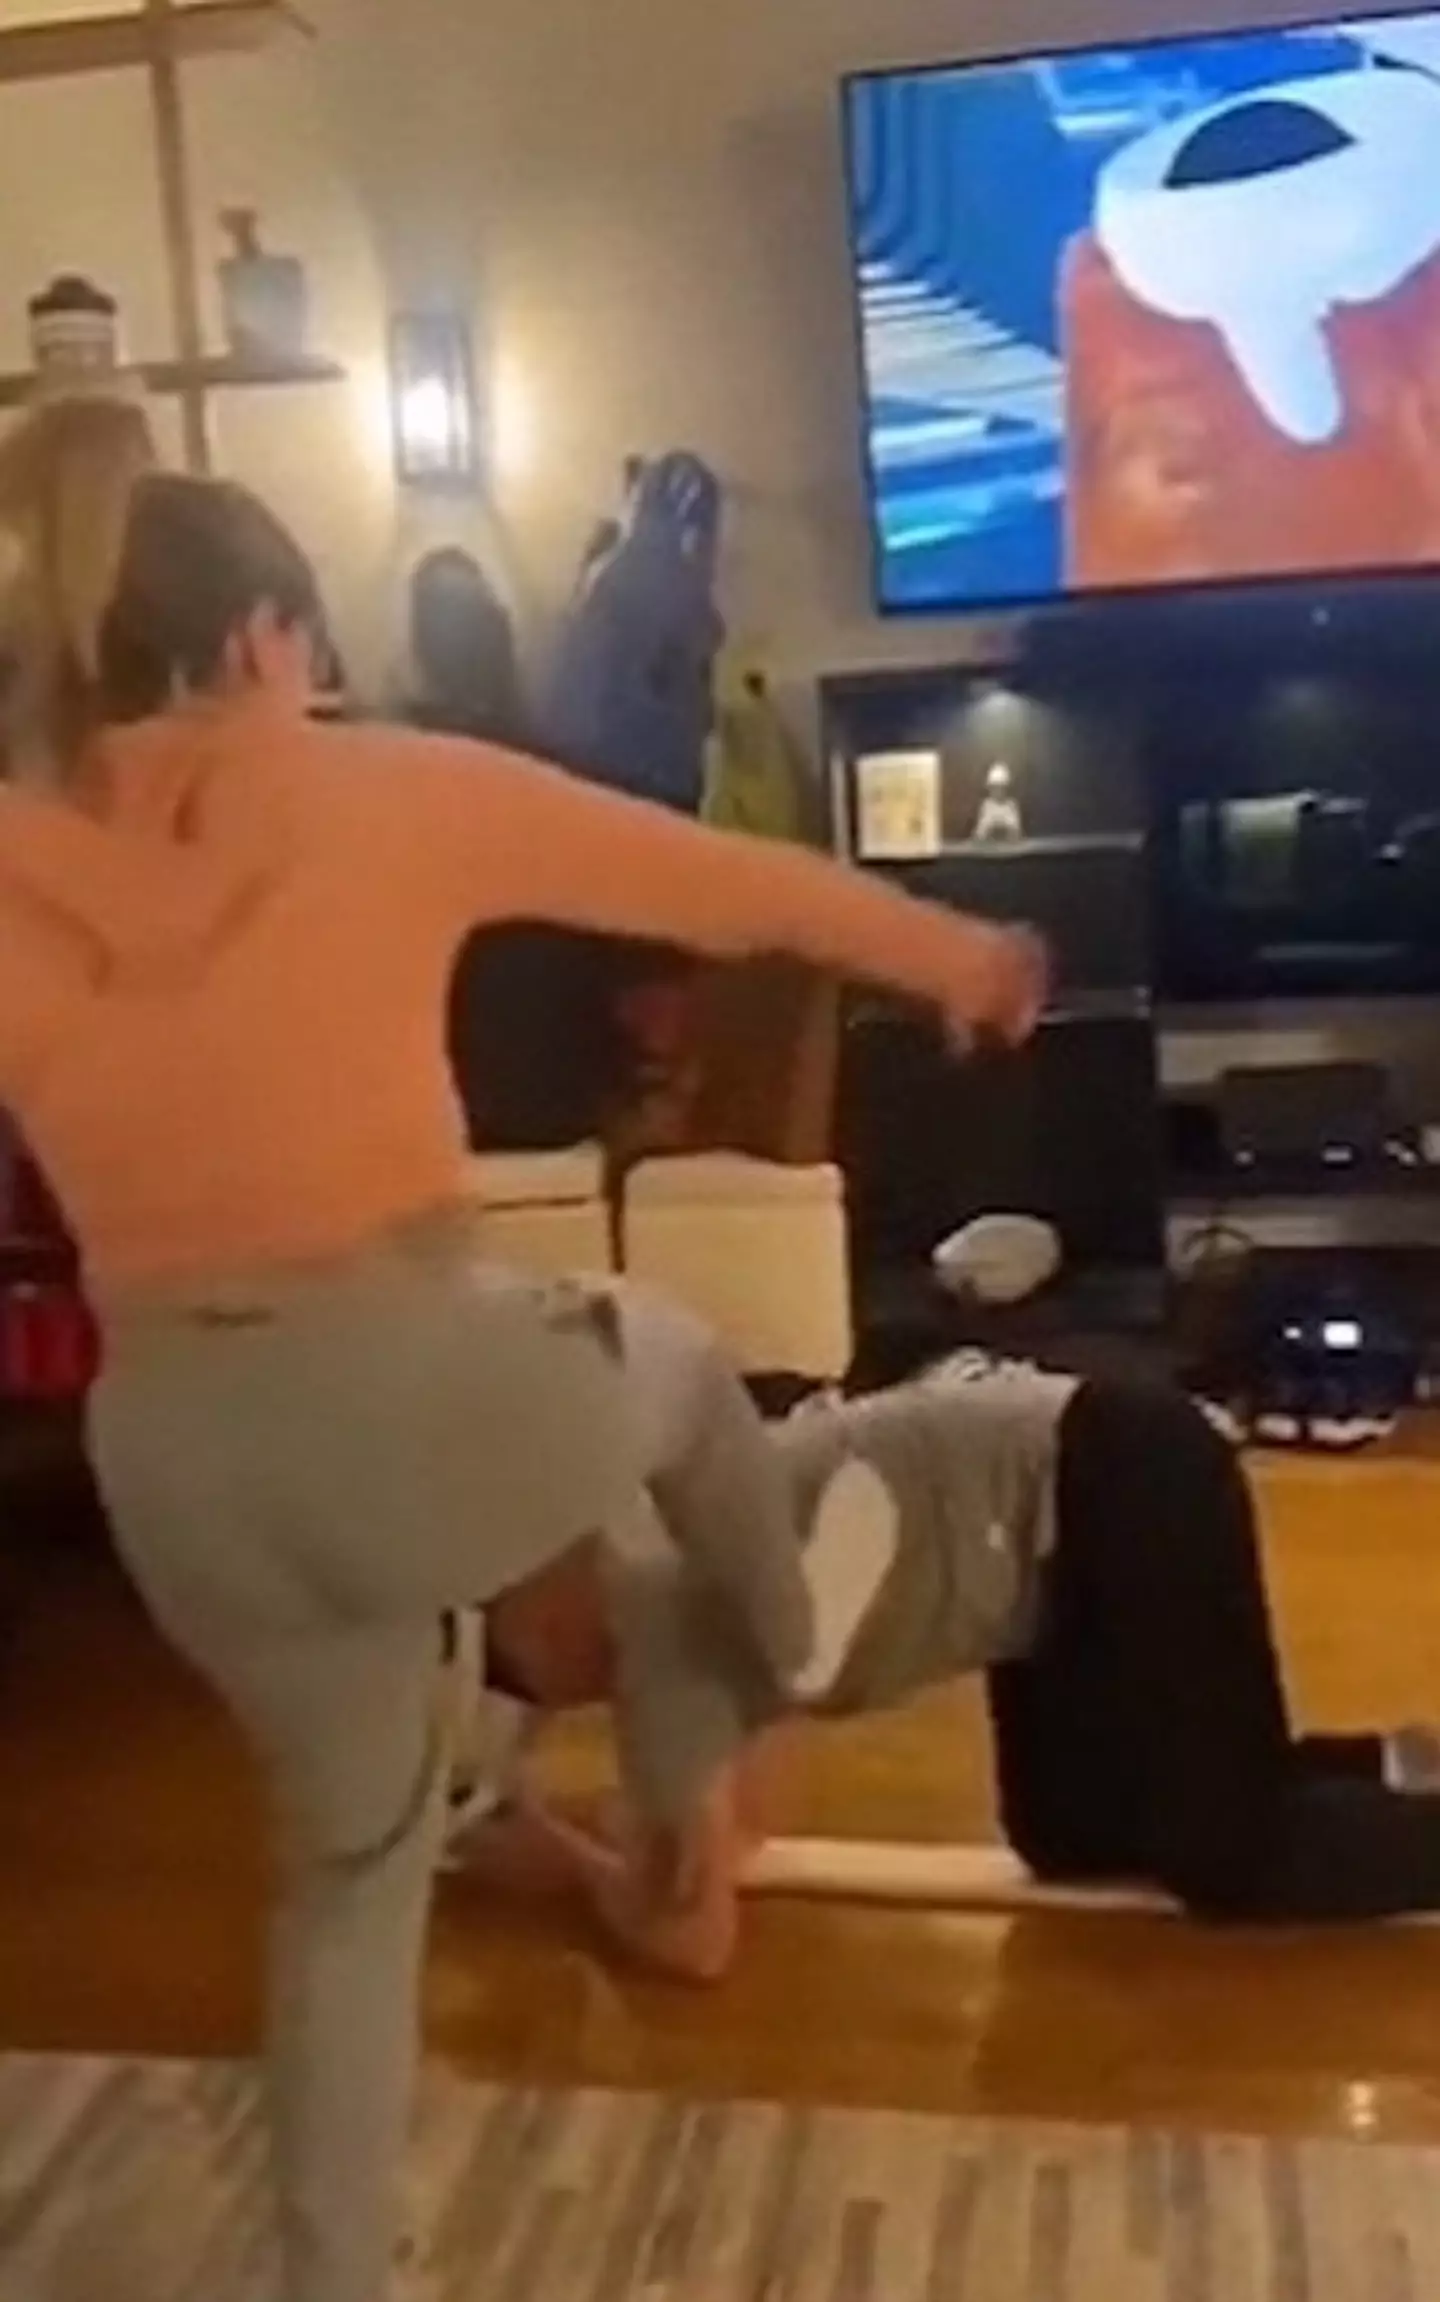 His partner can be seen kicking him off the virtual plank.